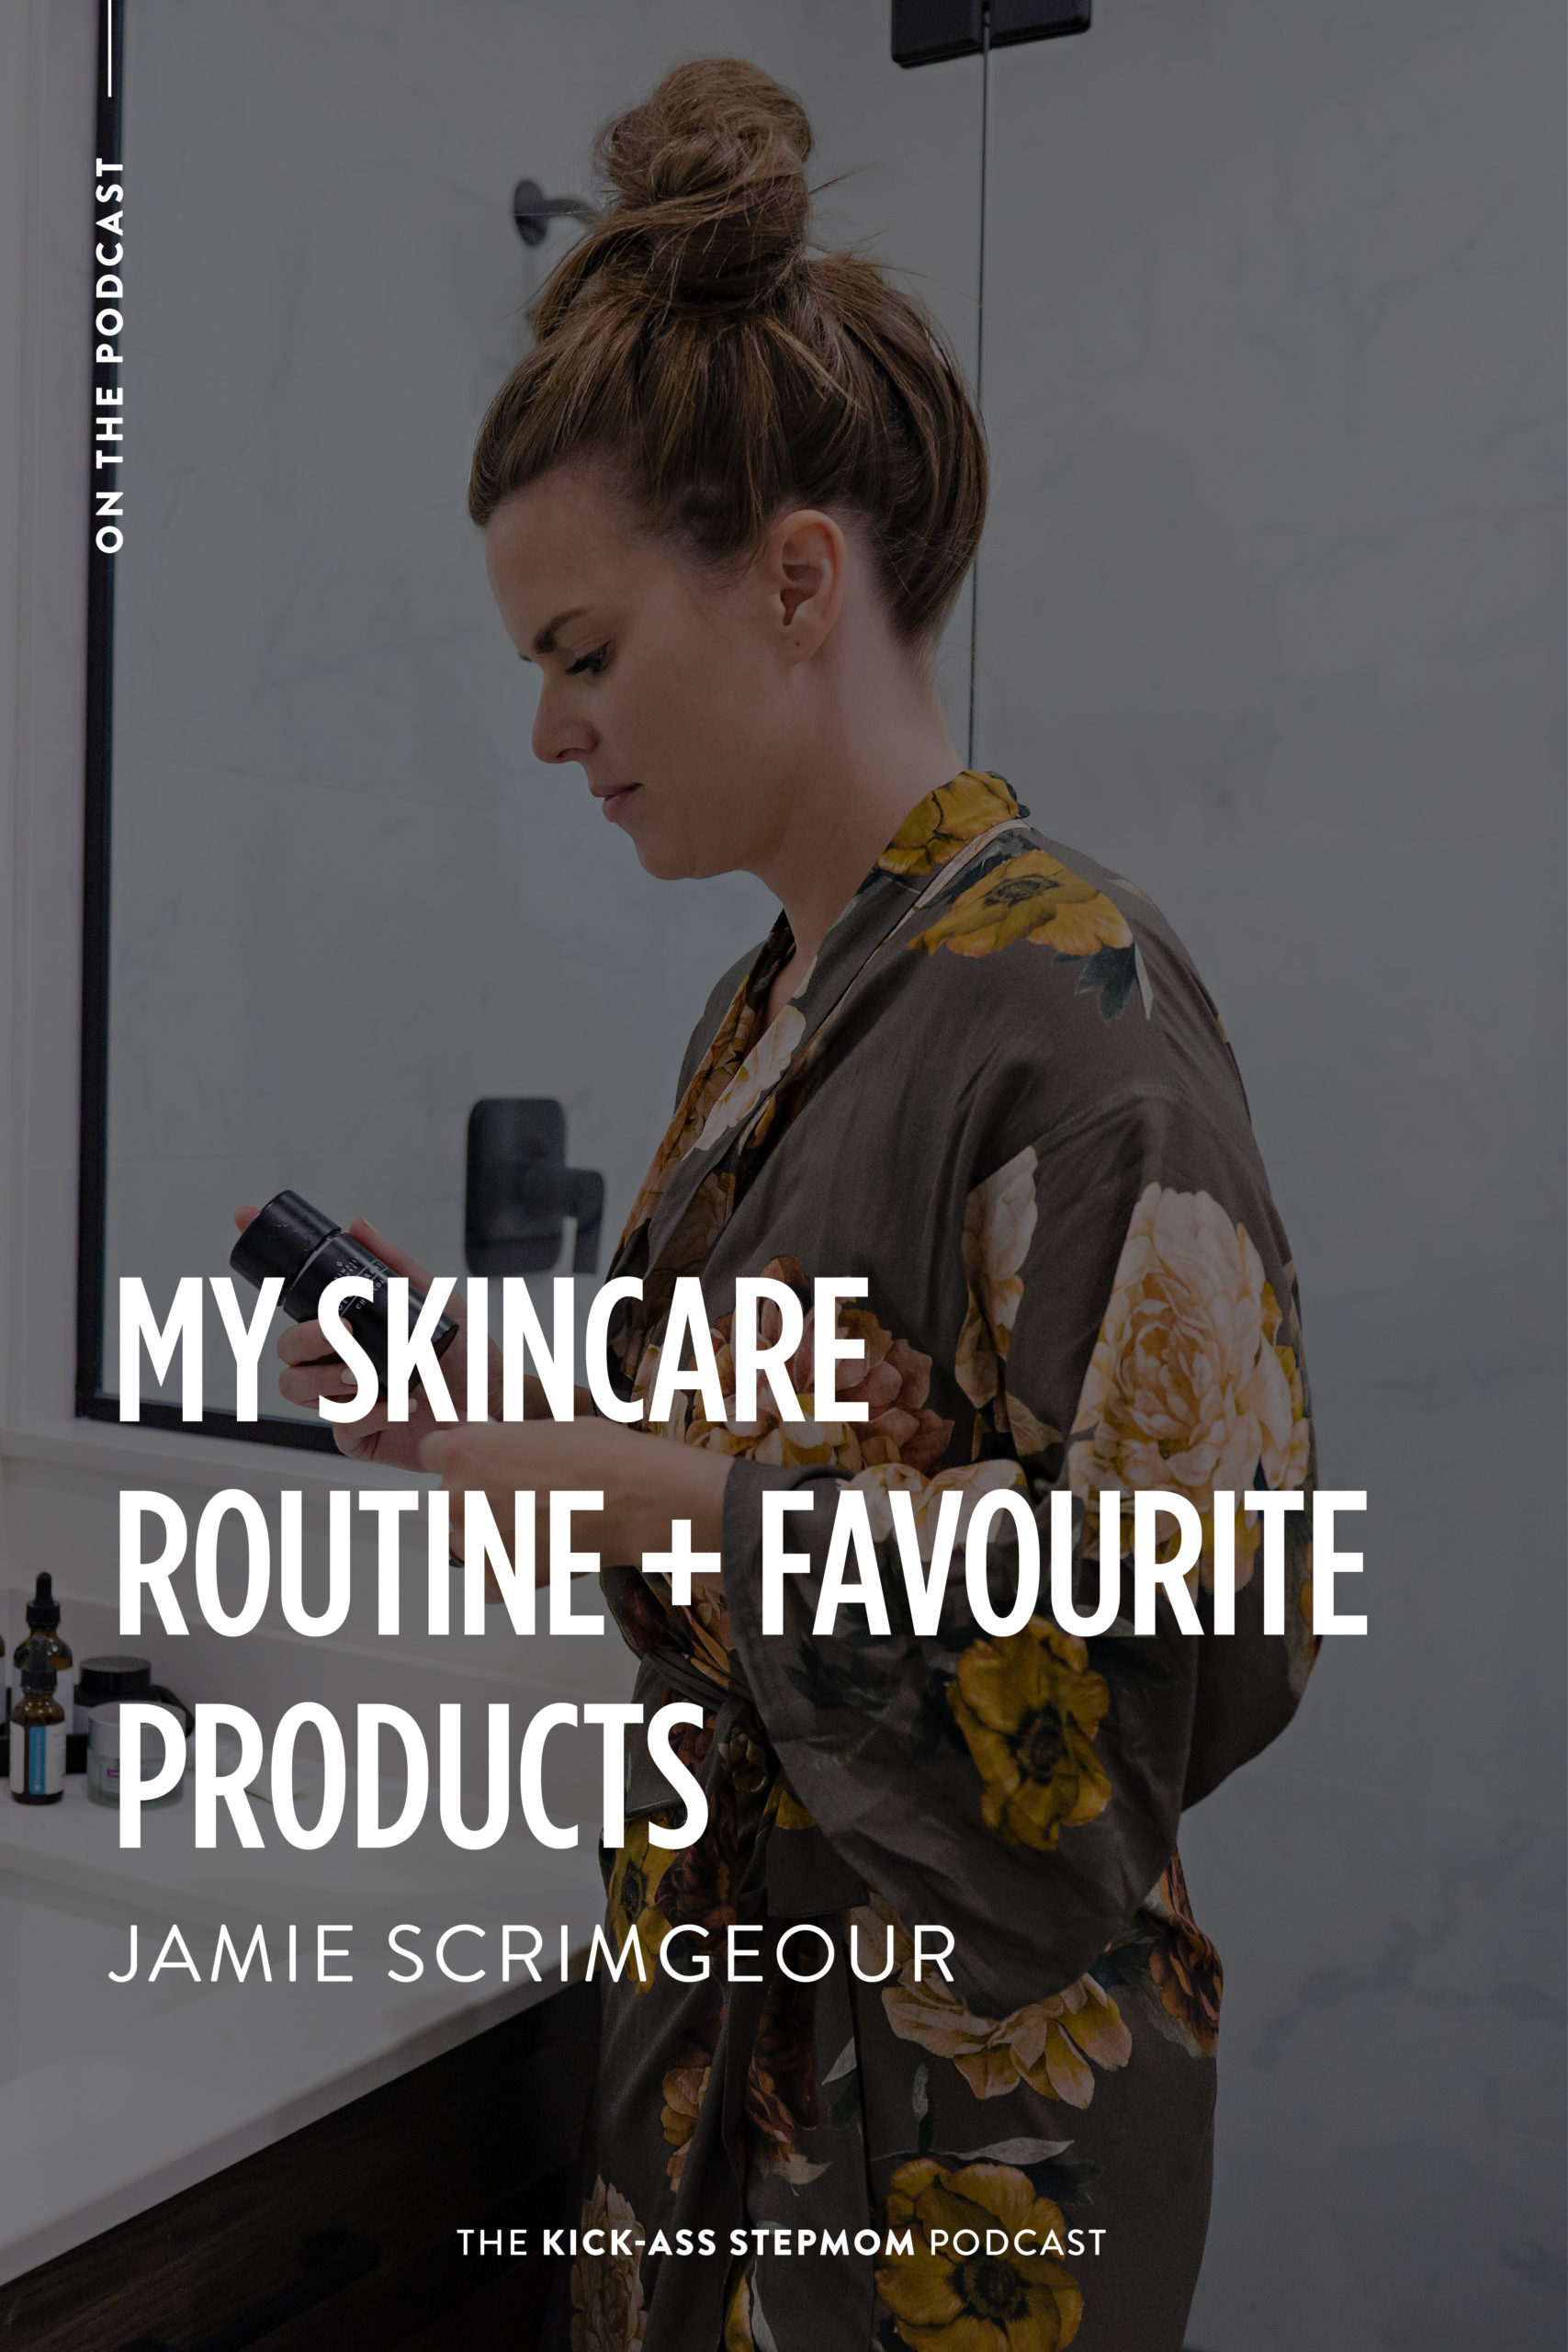 My Skincare Routine + Favourite Products